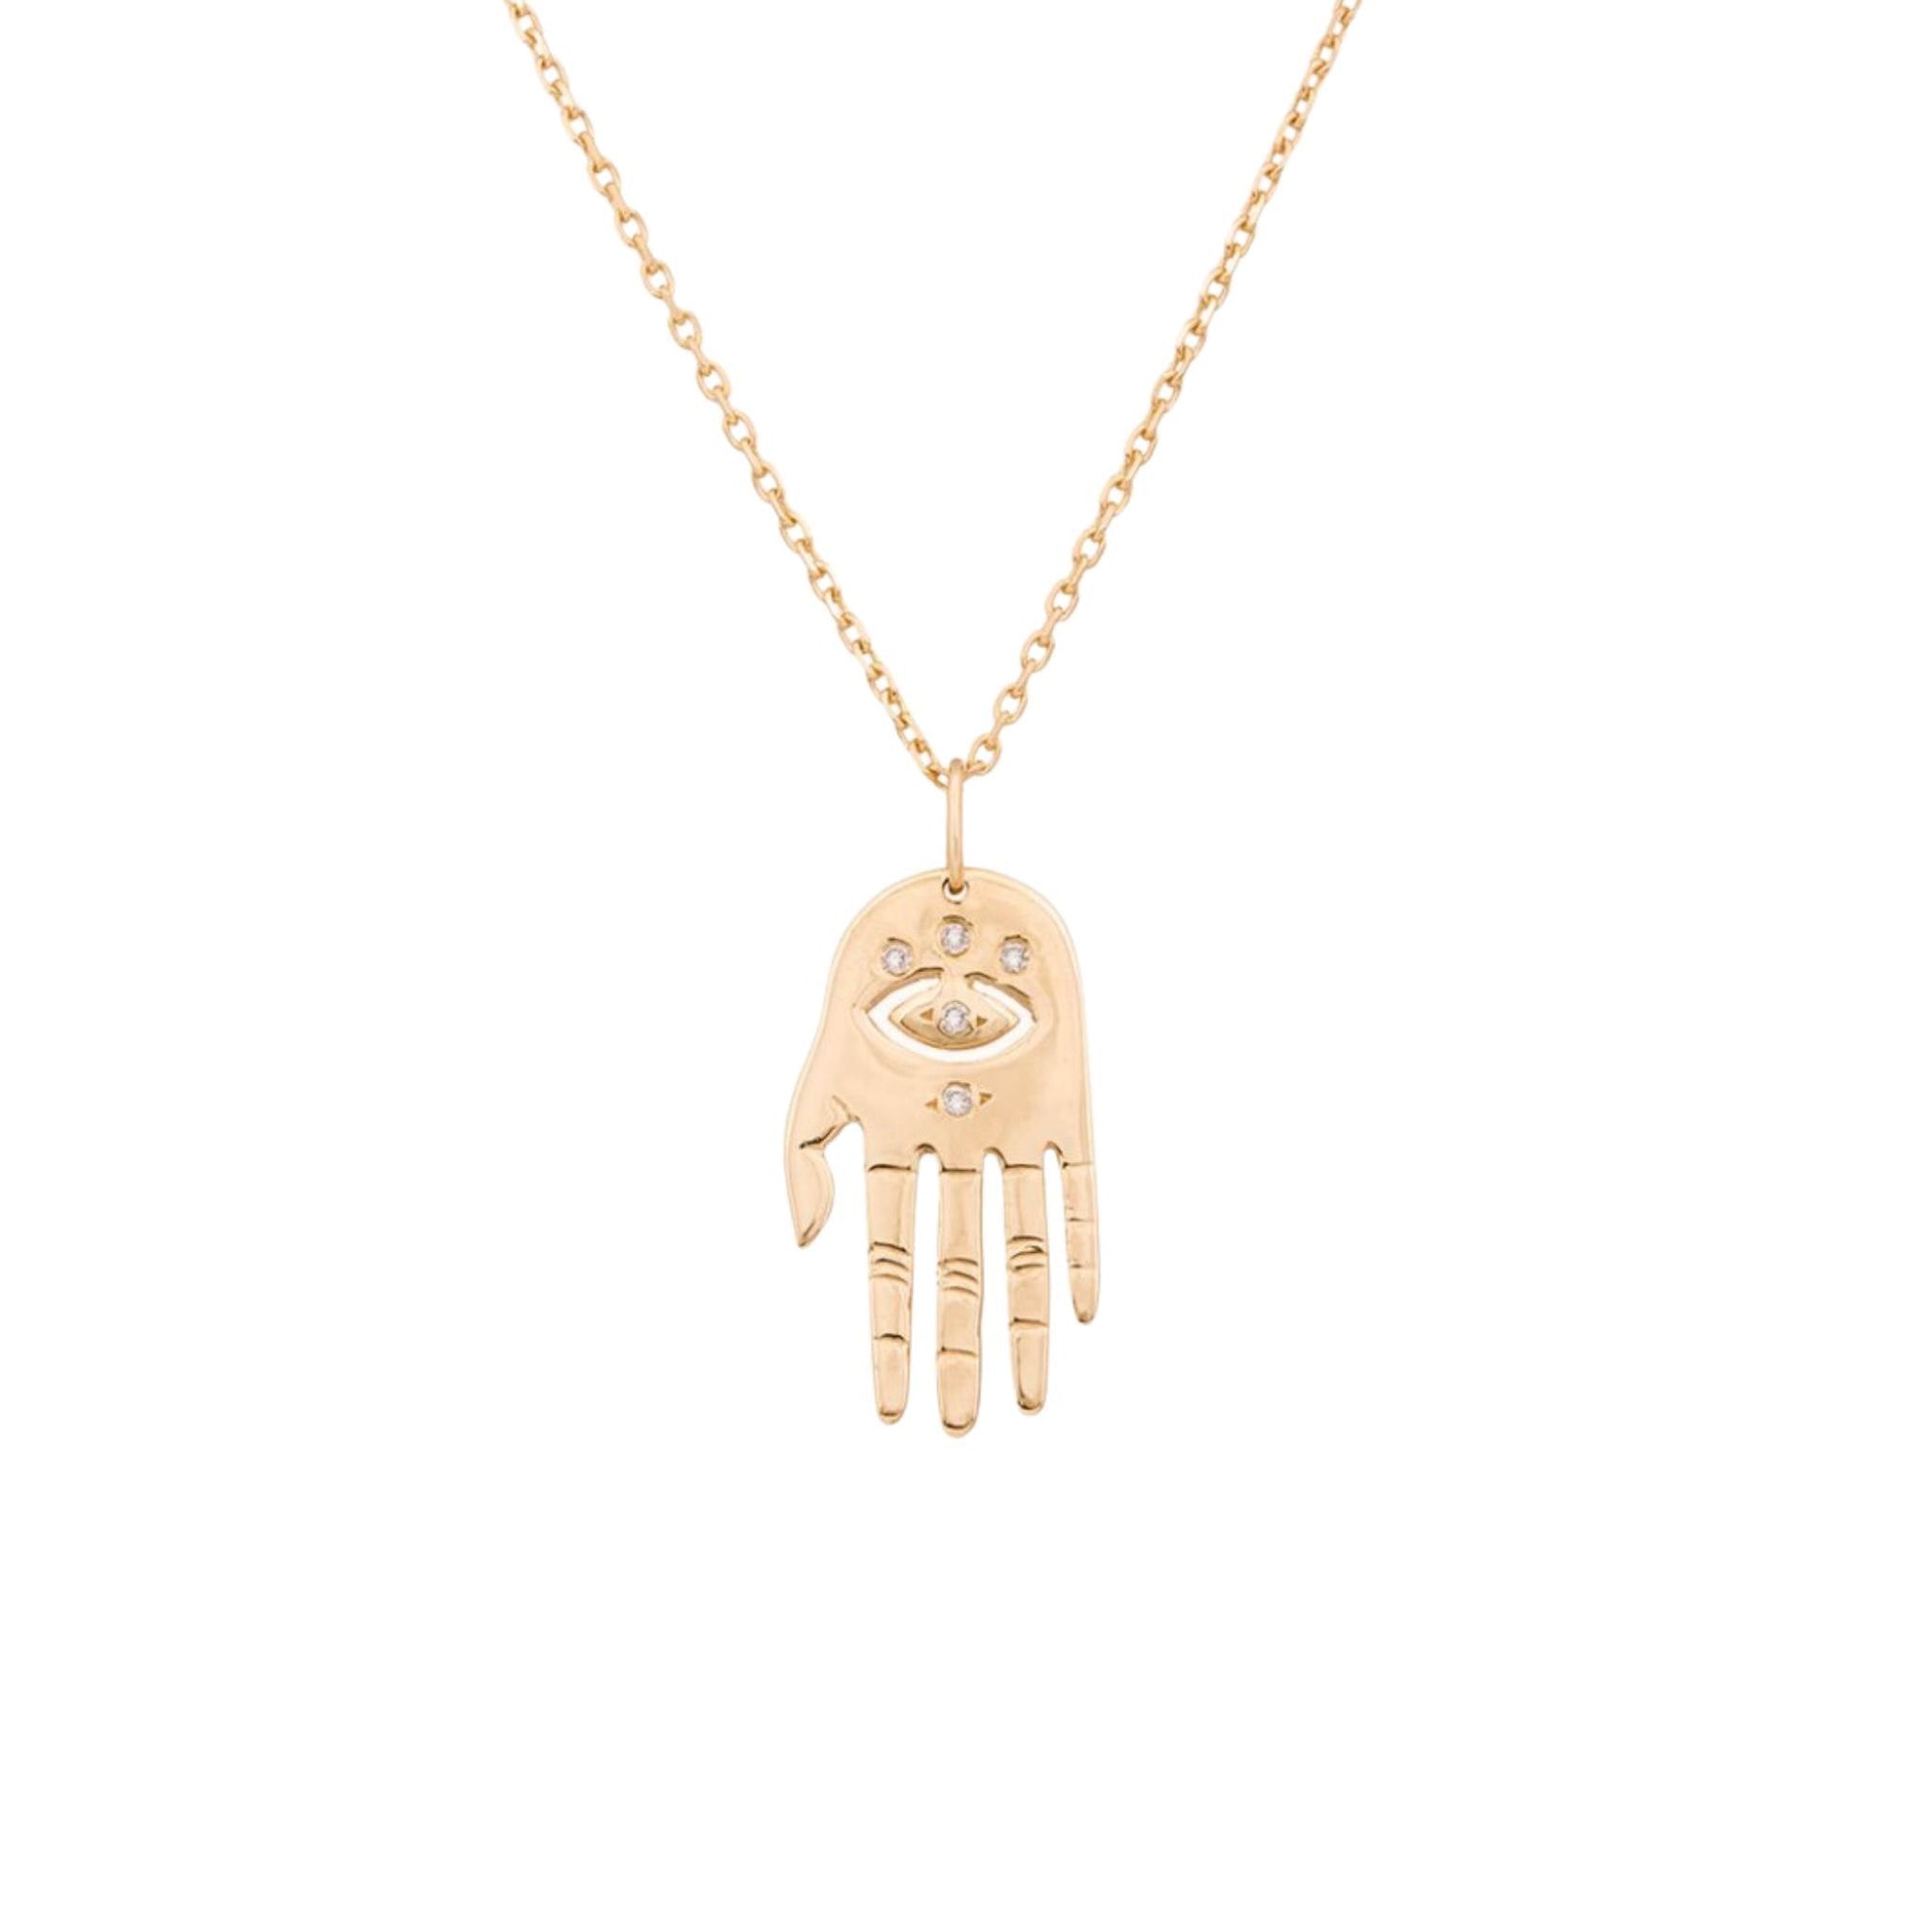 Celine Daoust Small Dharma’s Hand Necklace